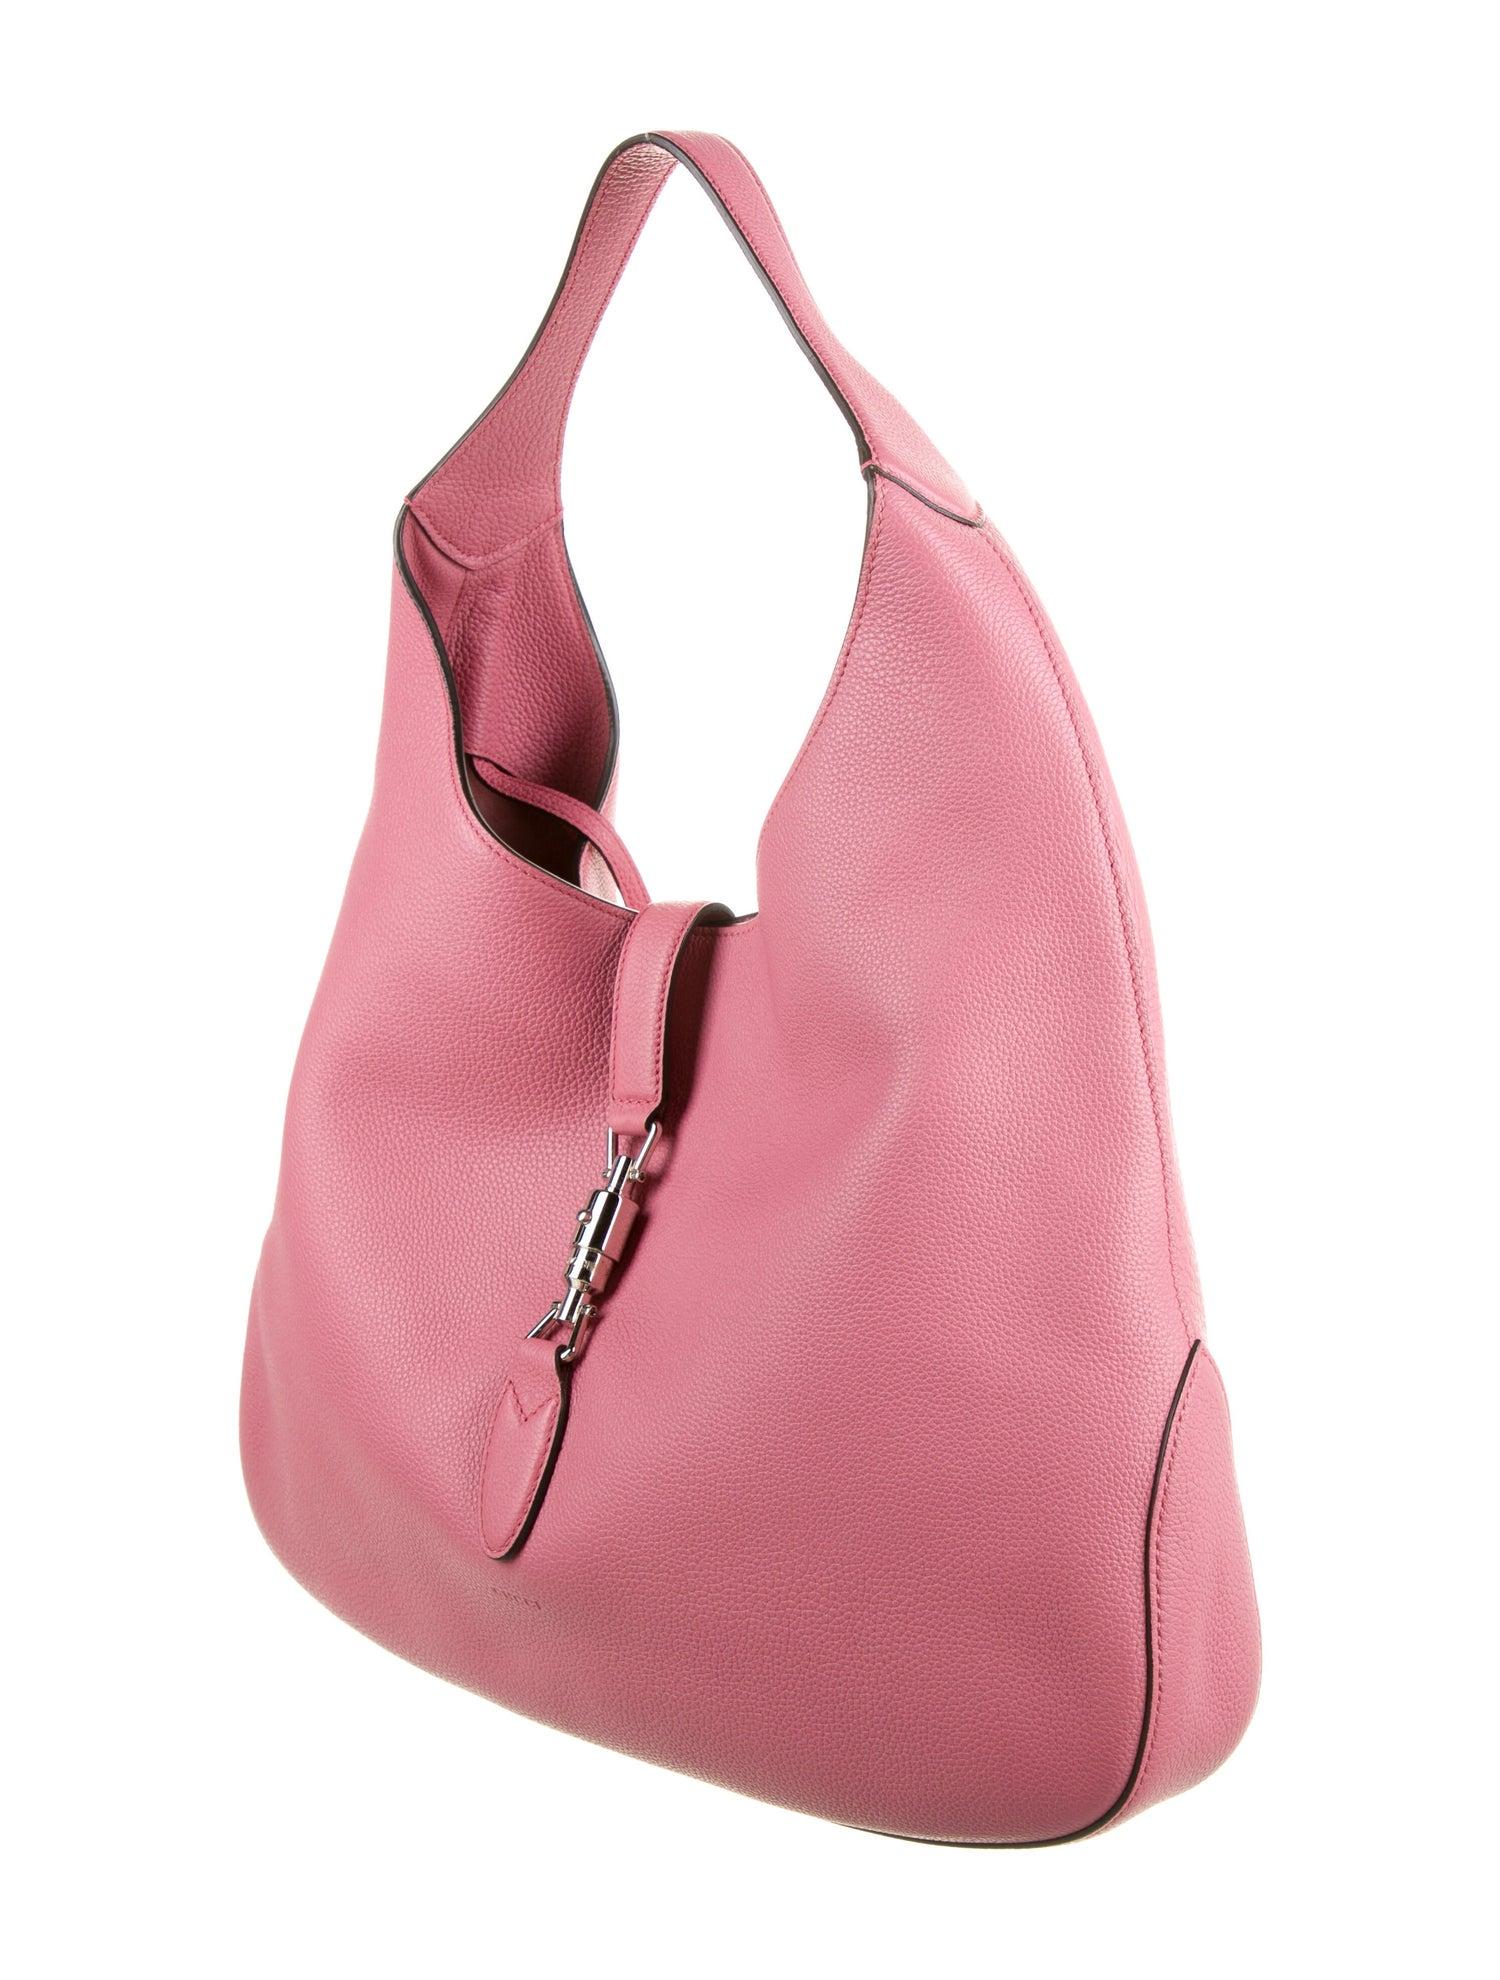 New With Tags Gucci Extra Large Pink Leather Jackie O Gaga Bag $3595 Fall 2014 In New Condition For Sale In Leesburg, VA